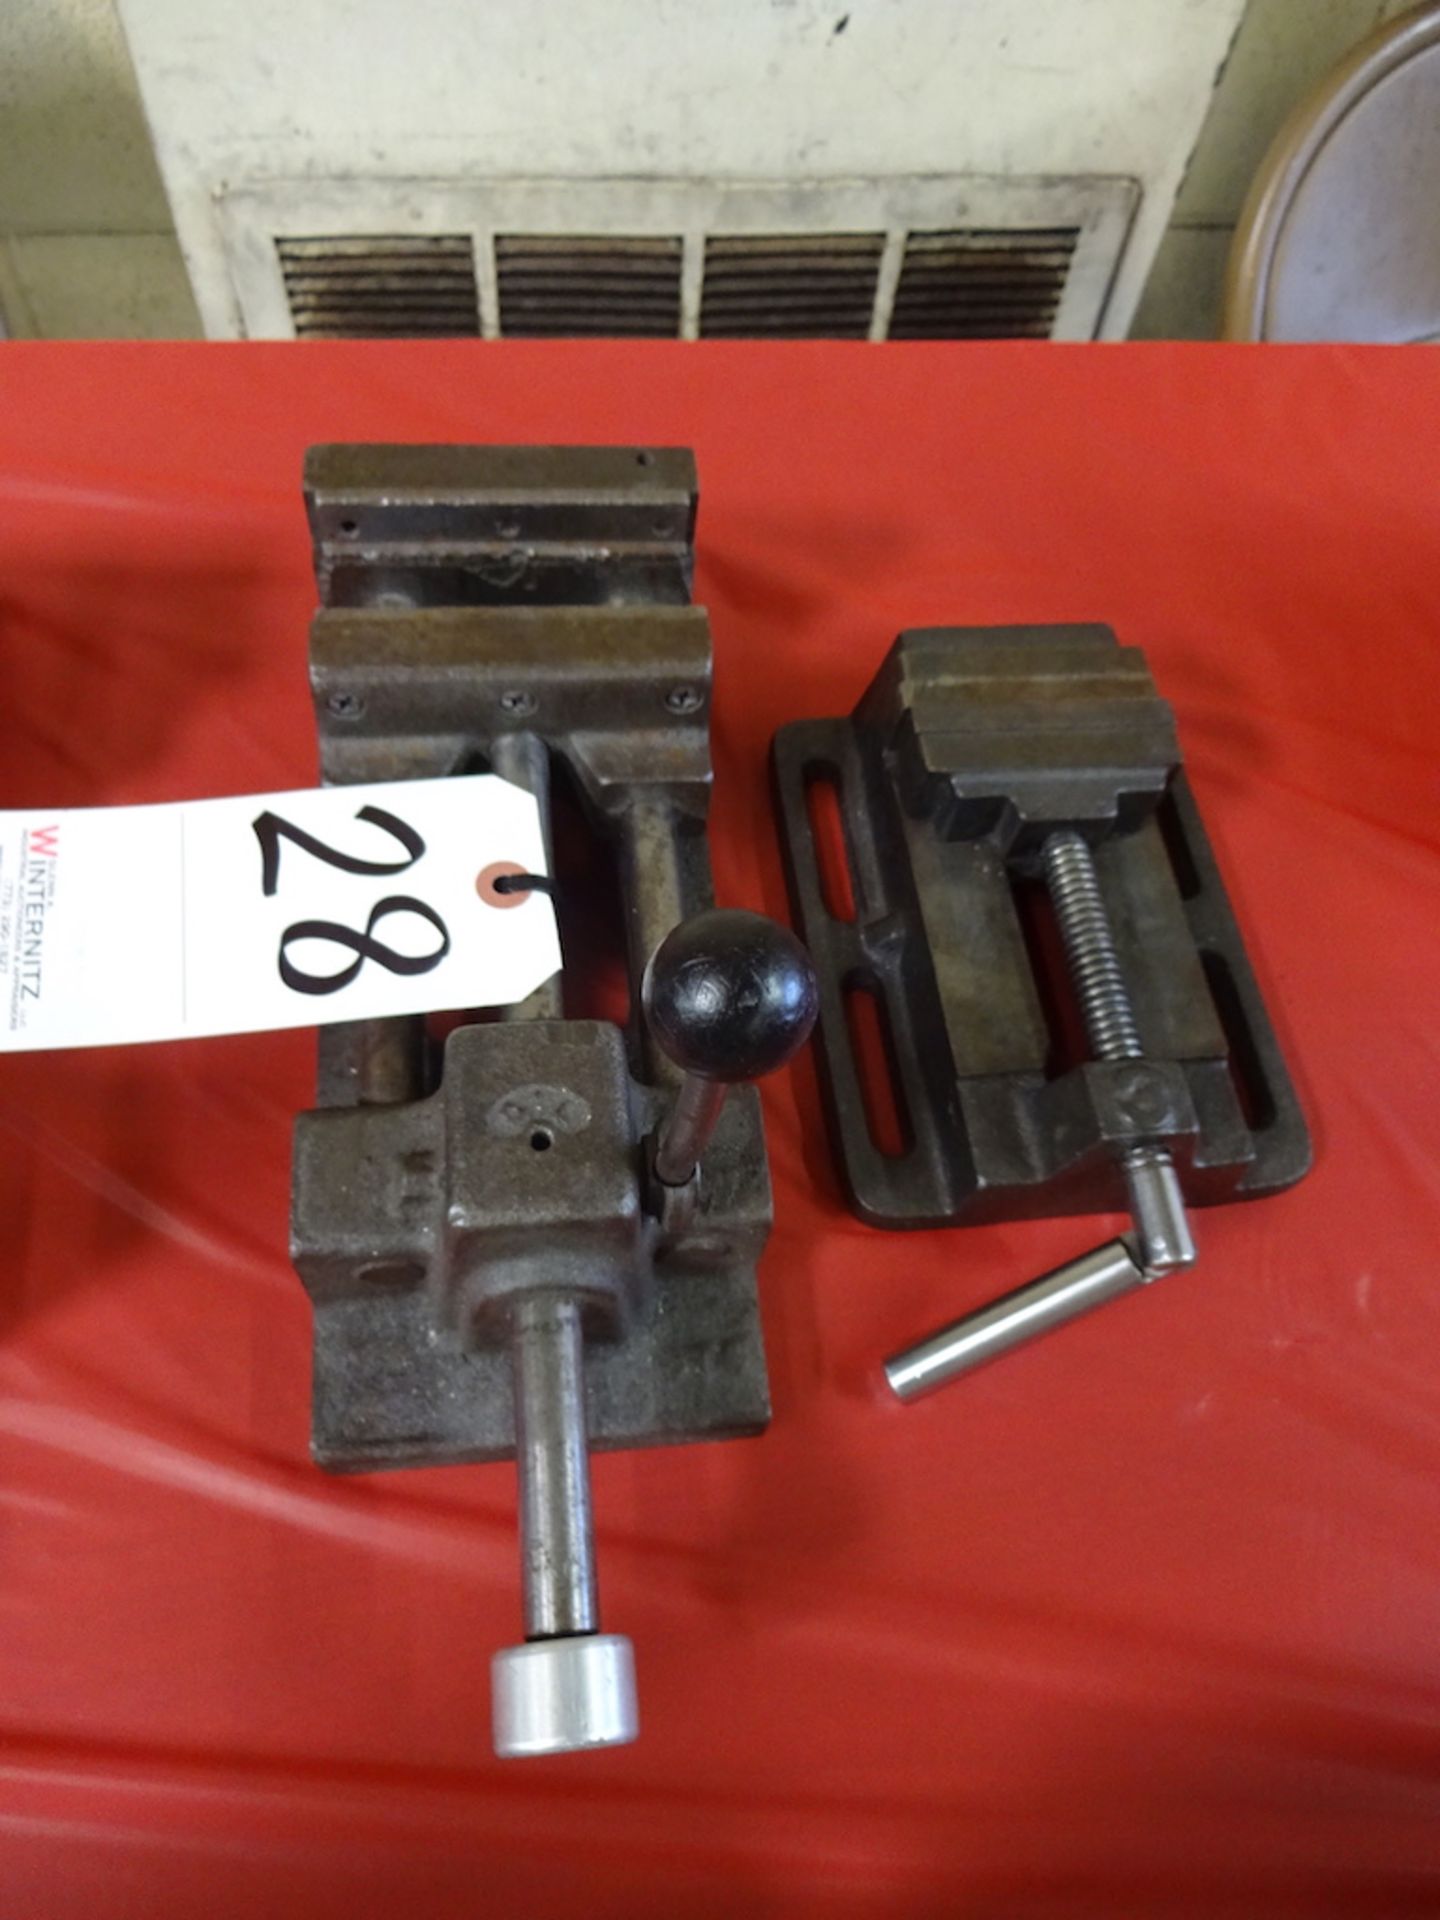 LOT: (1) 4 in. Speed Vise, (1) 3 in. Vise